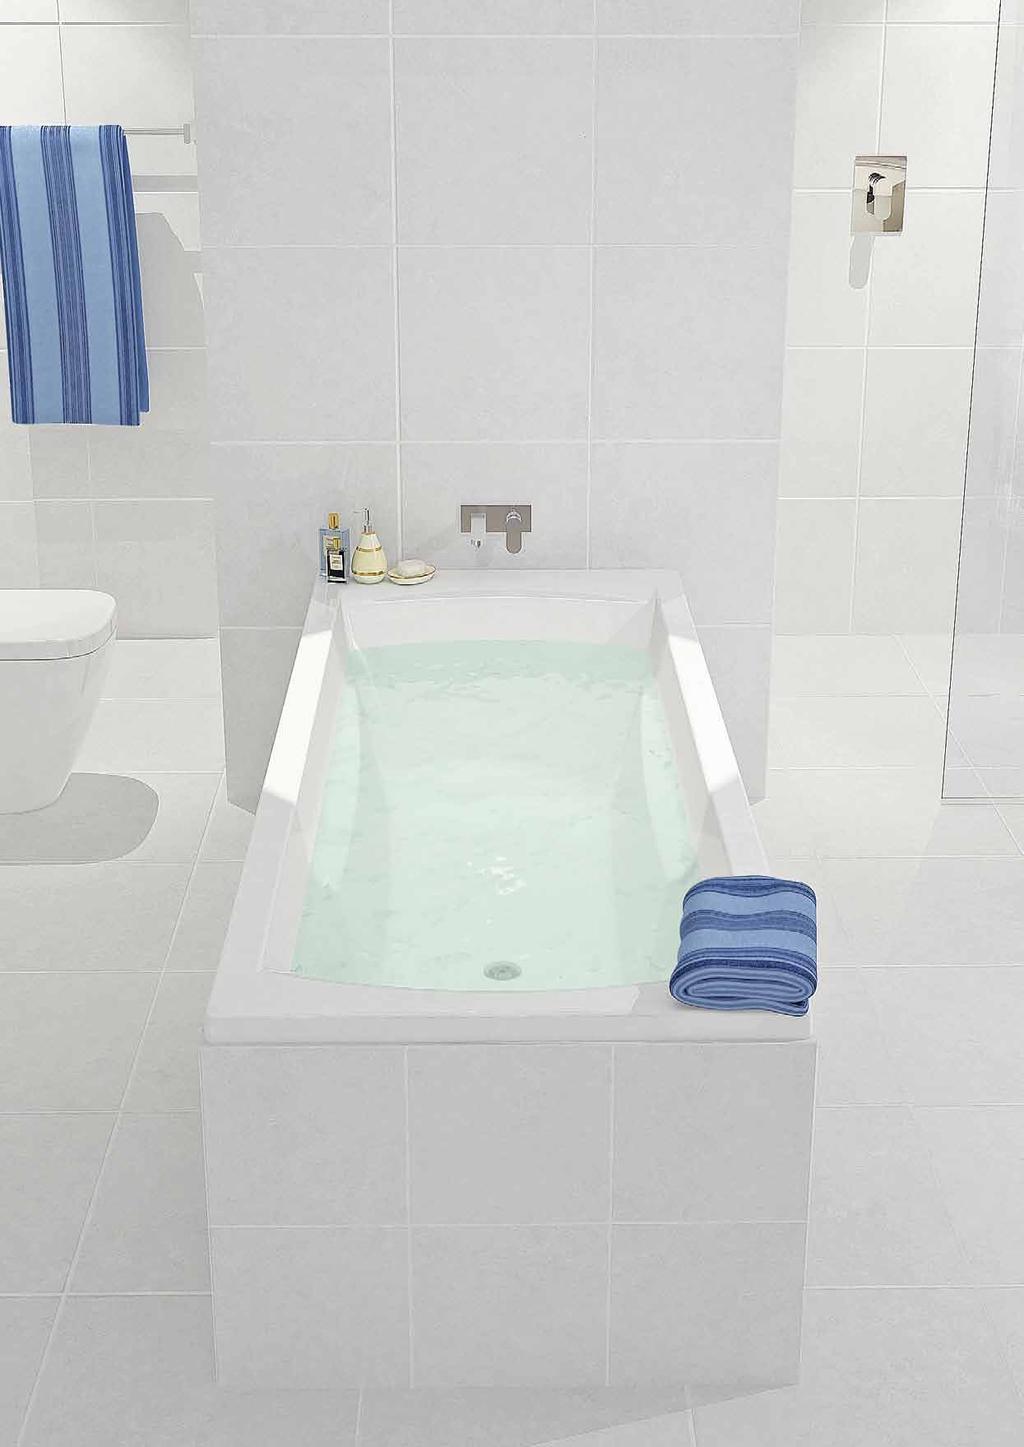 Rectangular Baths Maxton Maxton Island A fresh, simple, contemporary design with integrated armrests for added comfort.